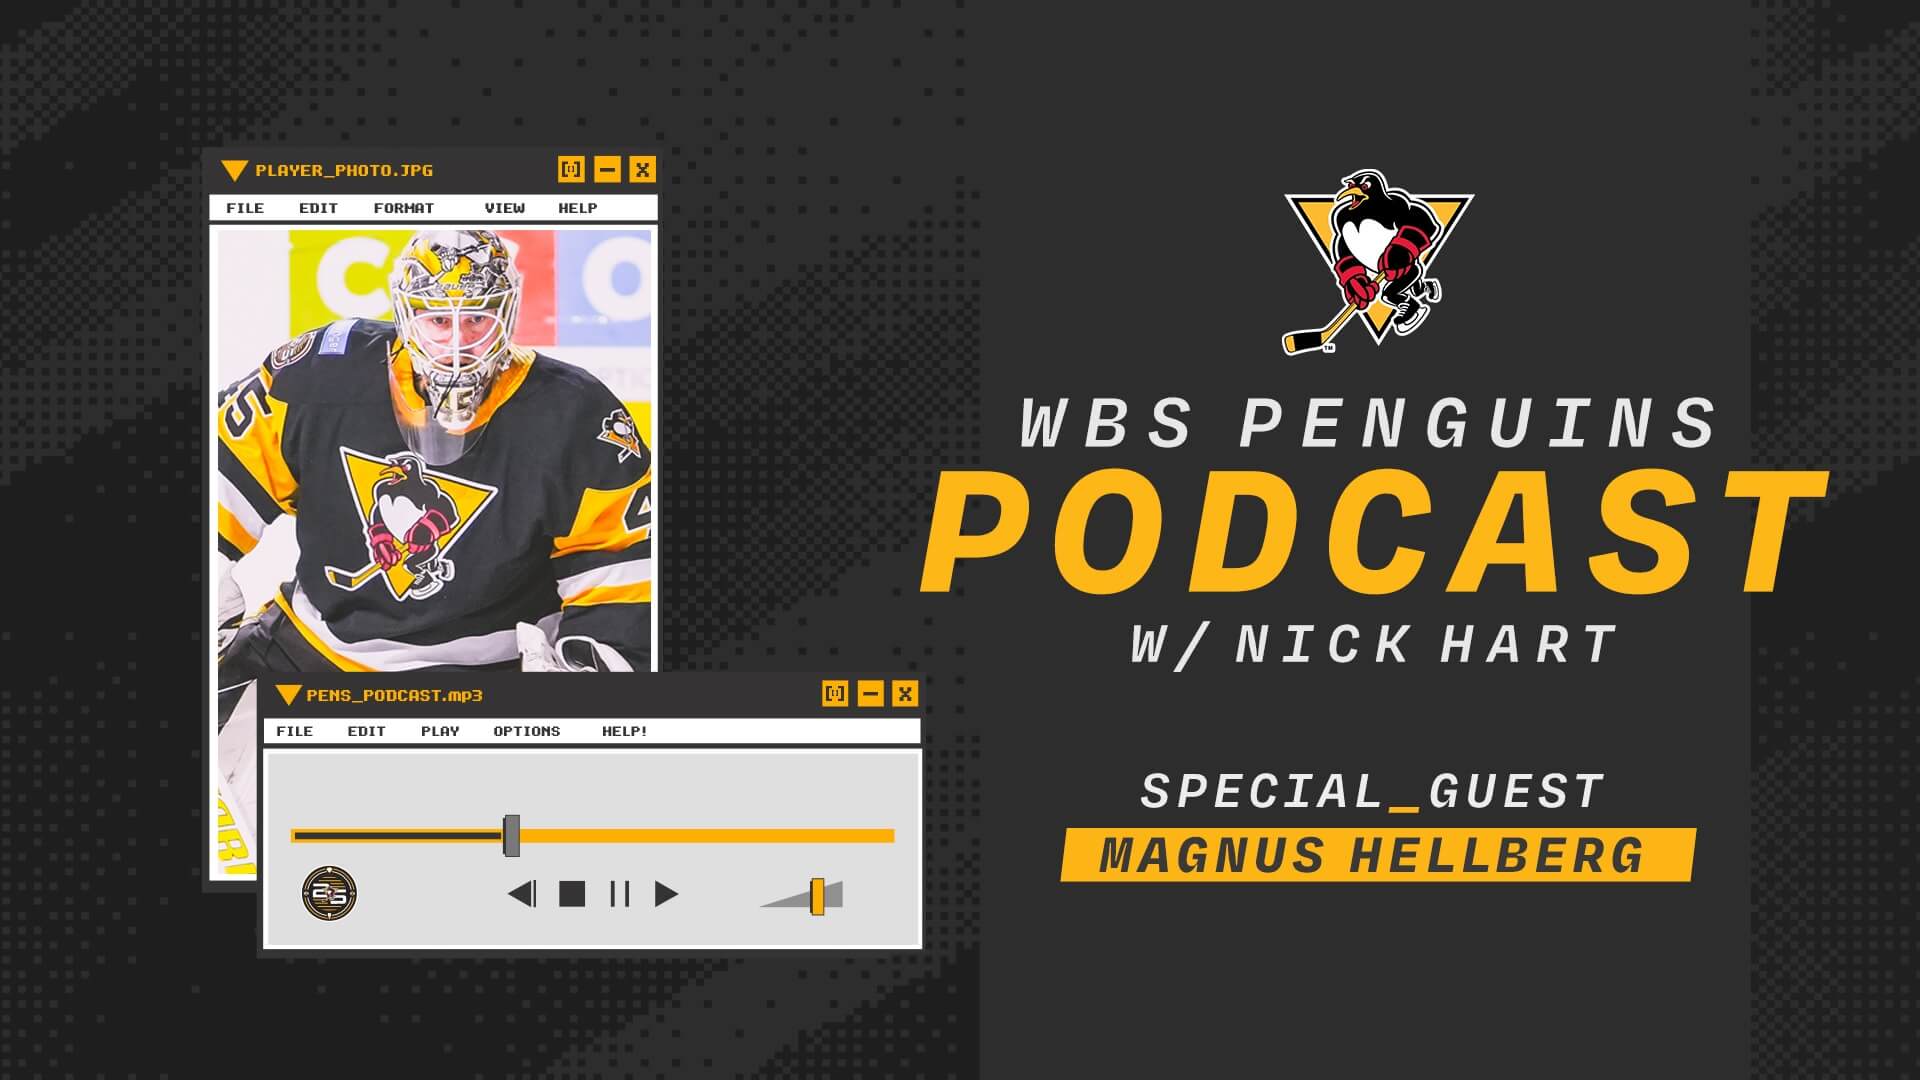 Read more about the article PENGUINS PODCAST w/ MAGNUS HELLBERG